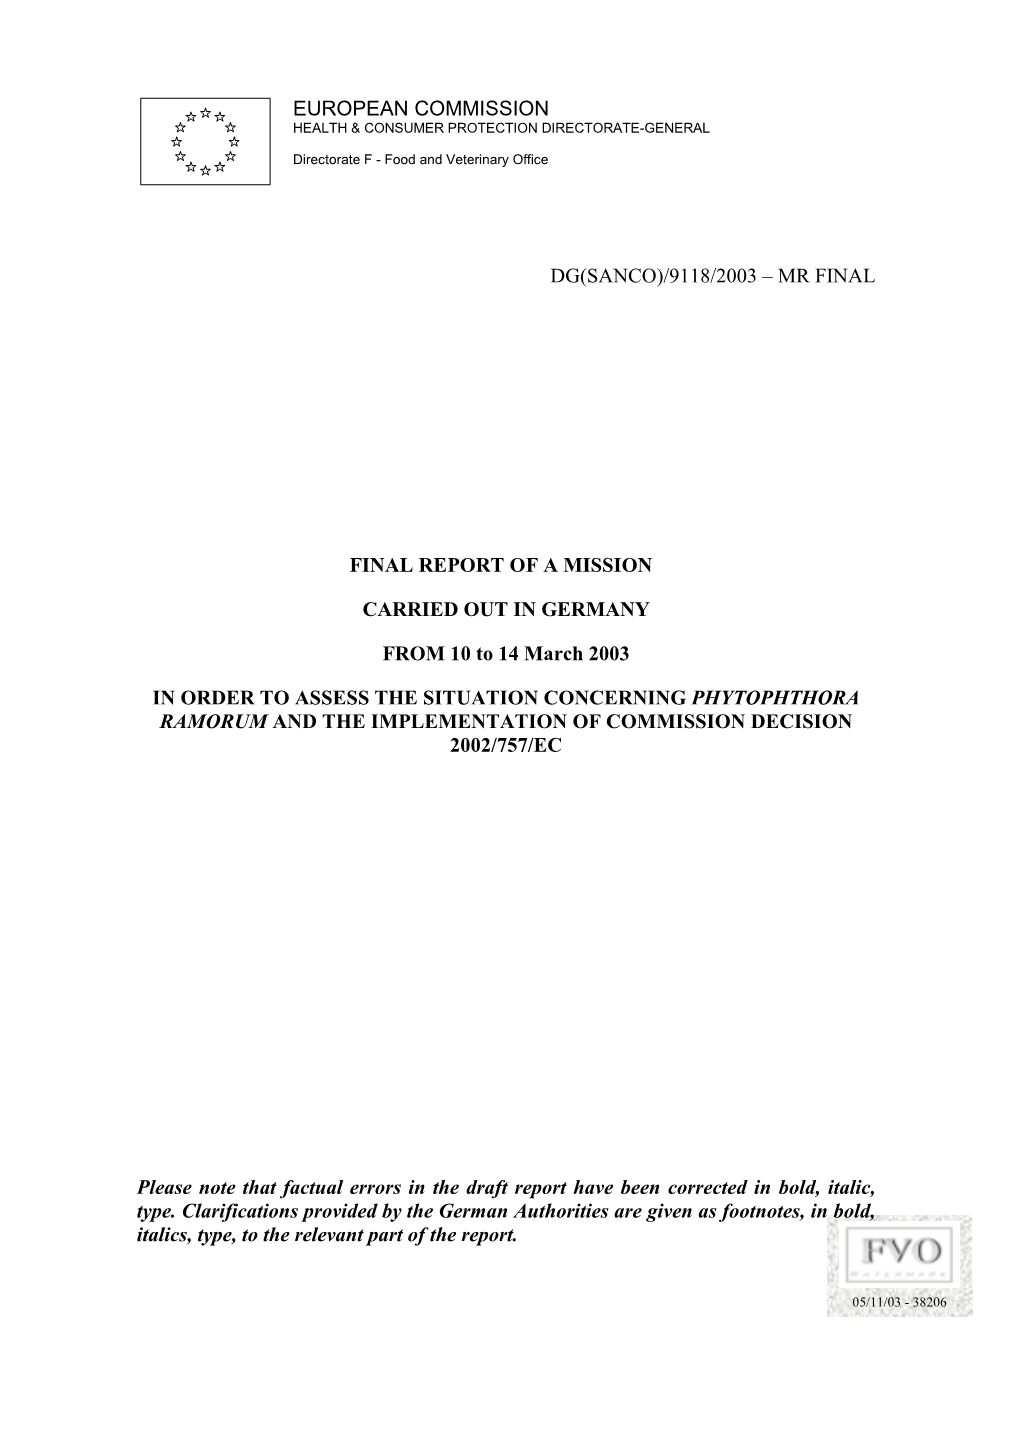 Final Report of a Mission Carried out in Germany from 10 to 14 March 2003